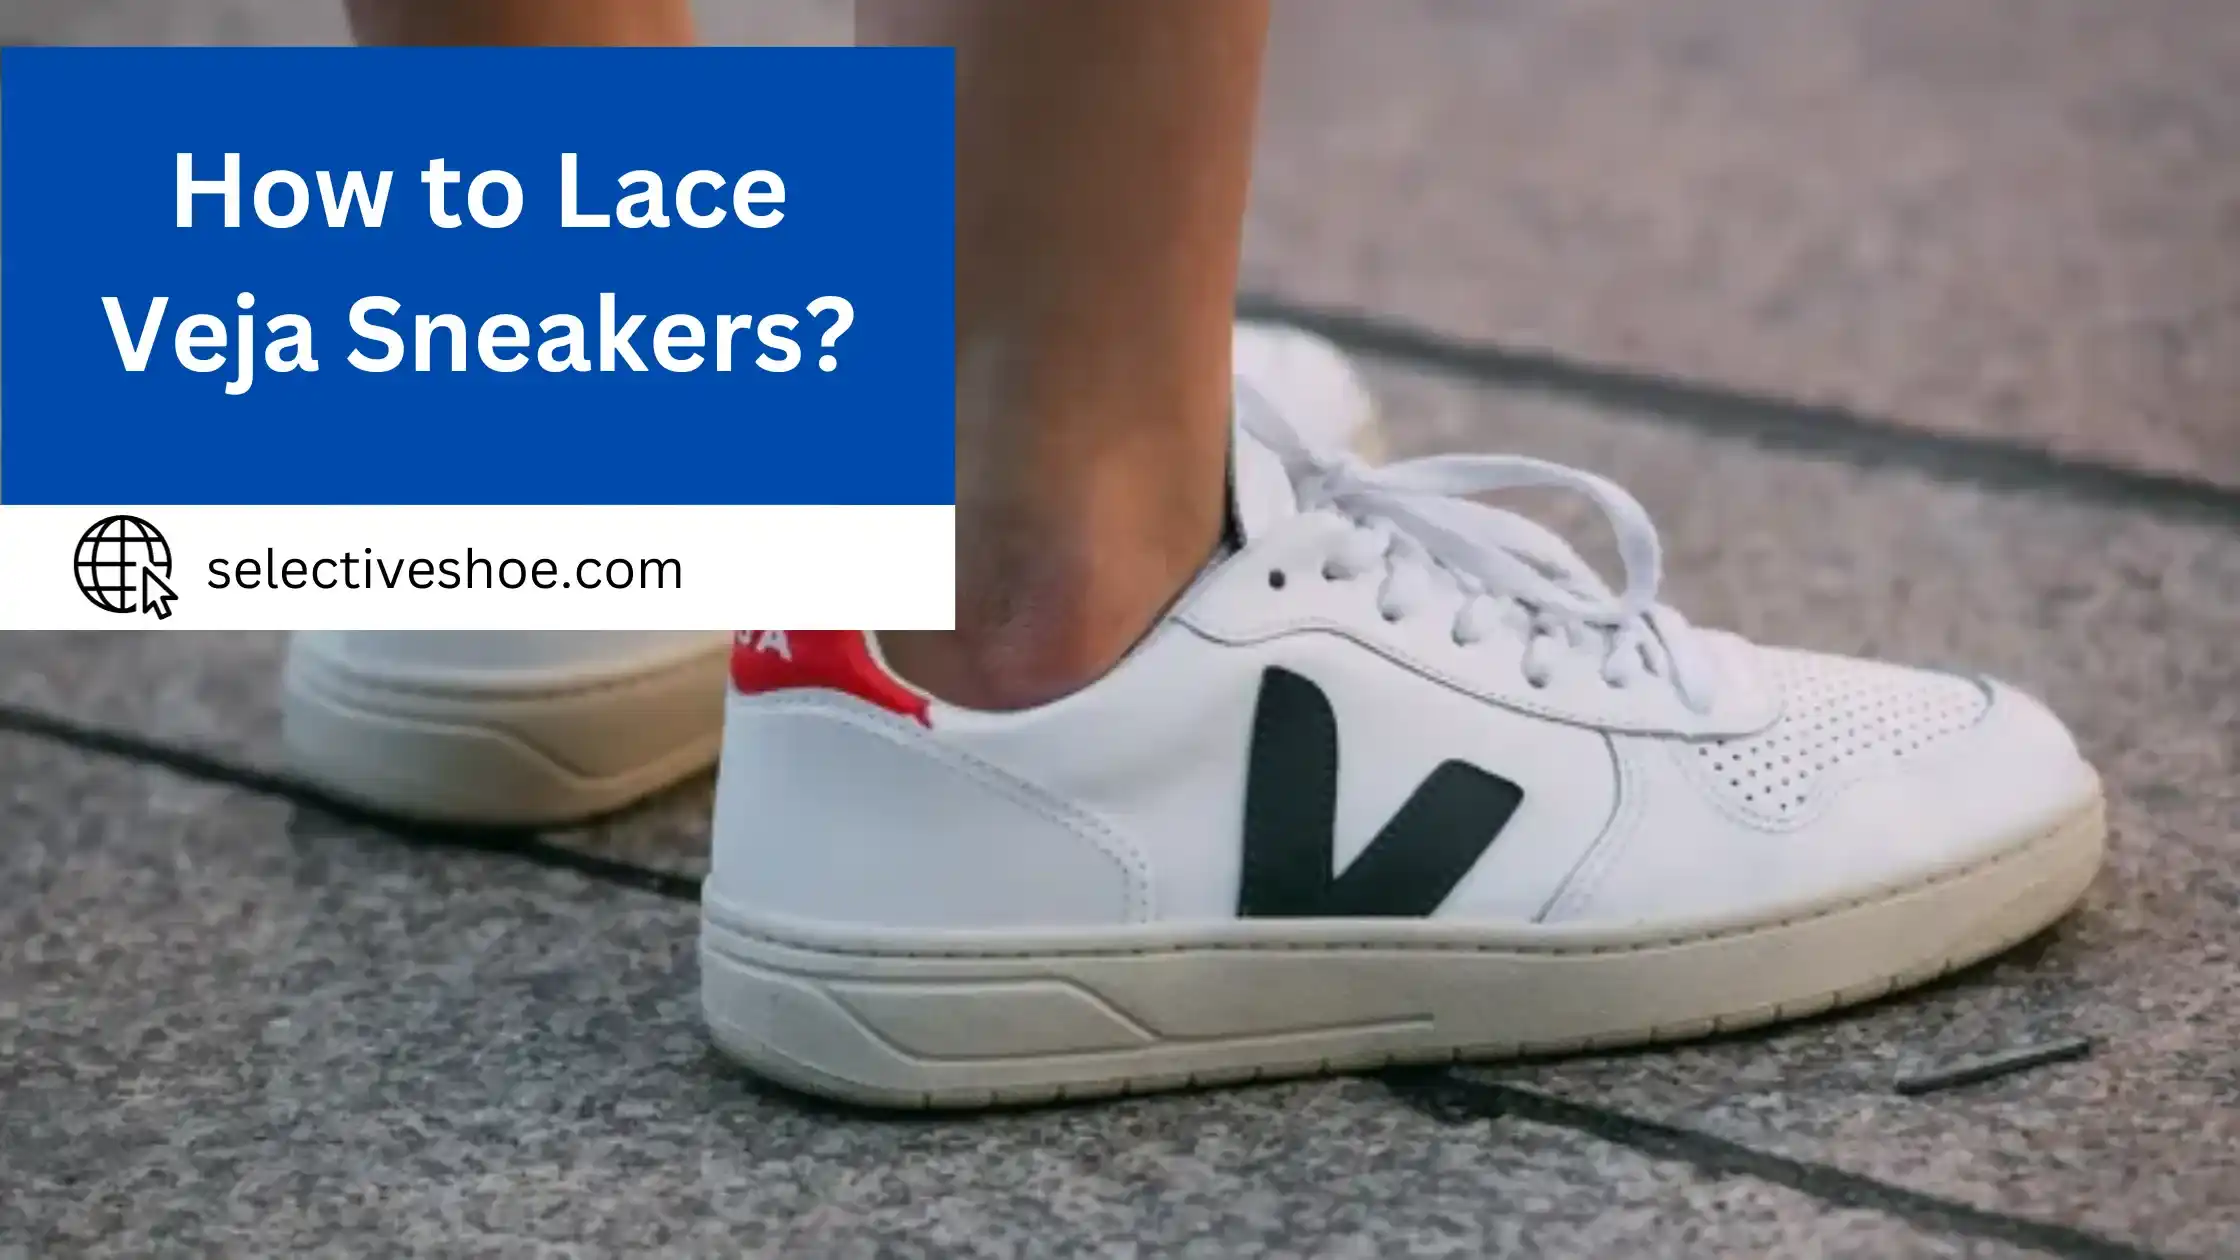 How to Lace Veja Sneakers? Expert Analysis